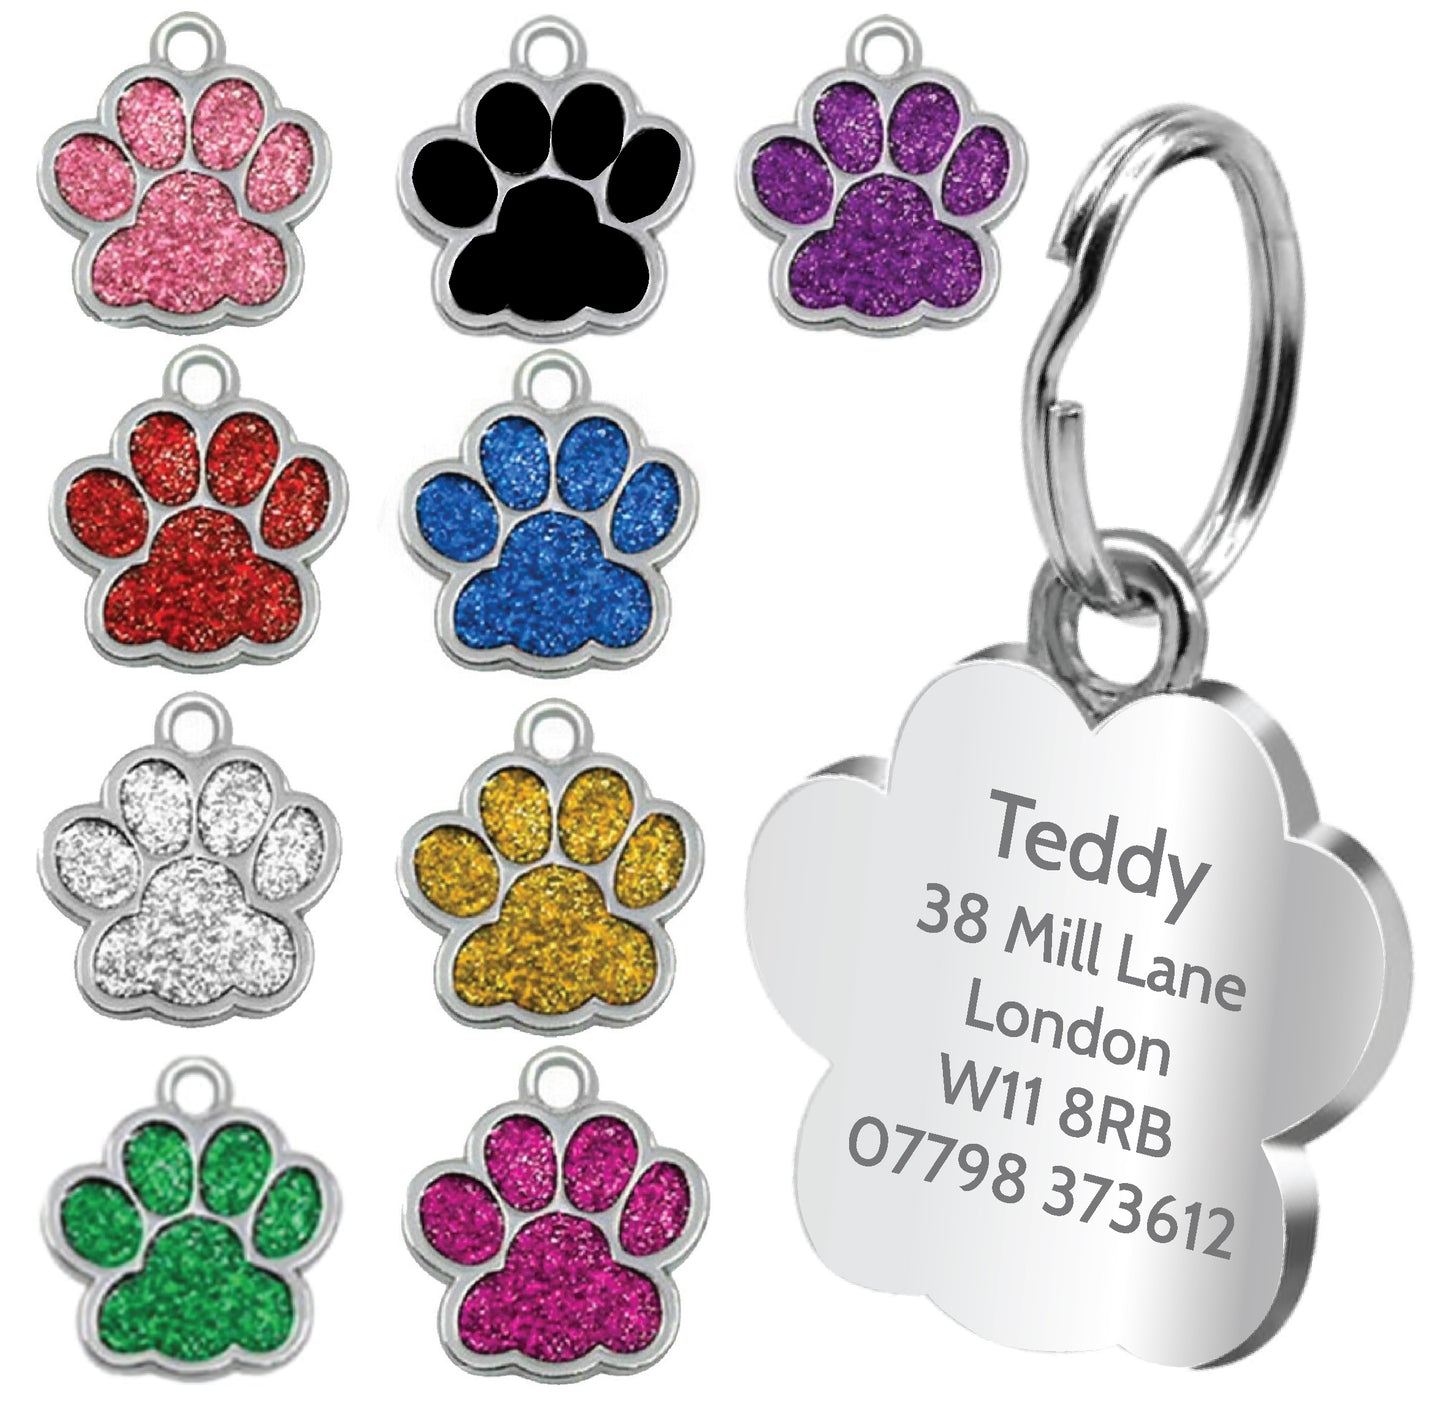 Personalised Engraved Pet Tag - Glitter Paw